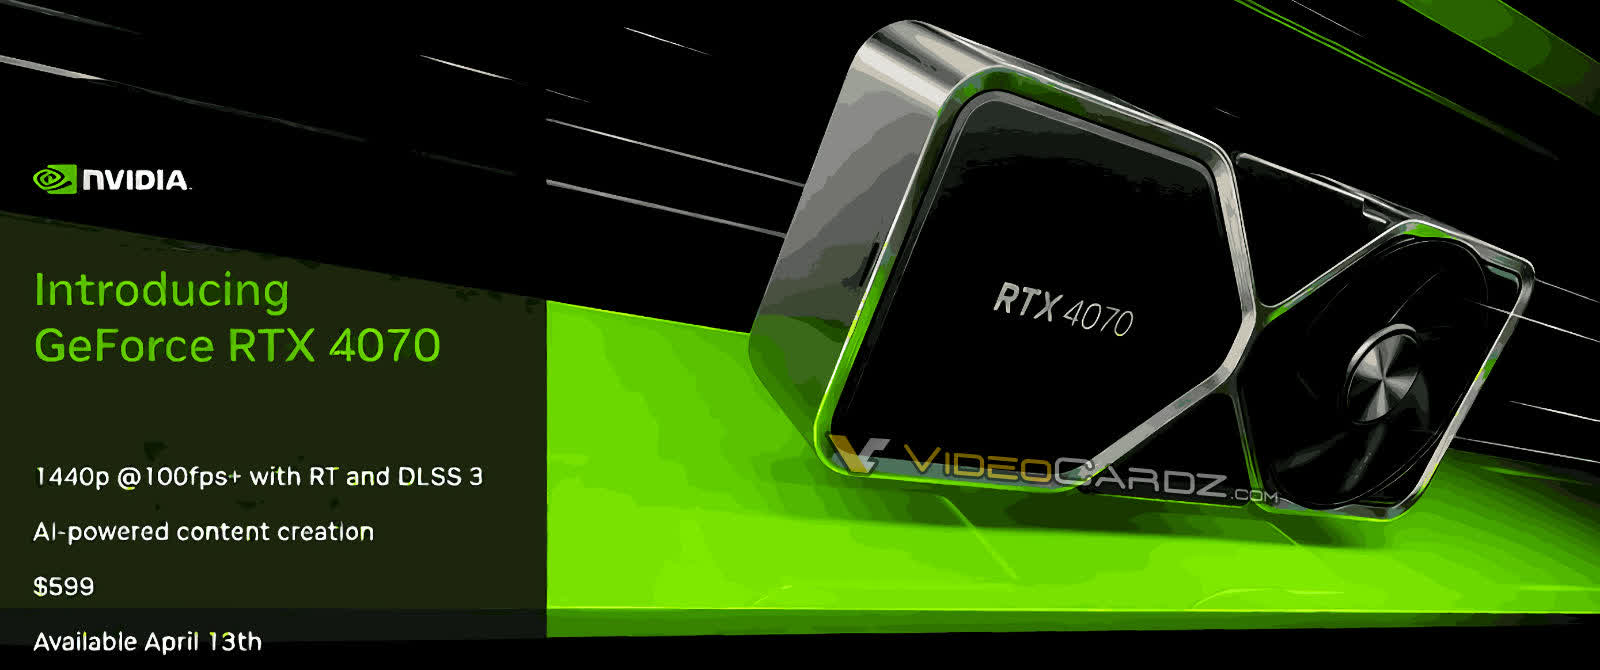 Nvidia benchmarks show the RTX 4070 taking on the RTX 3080